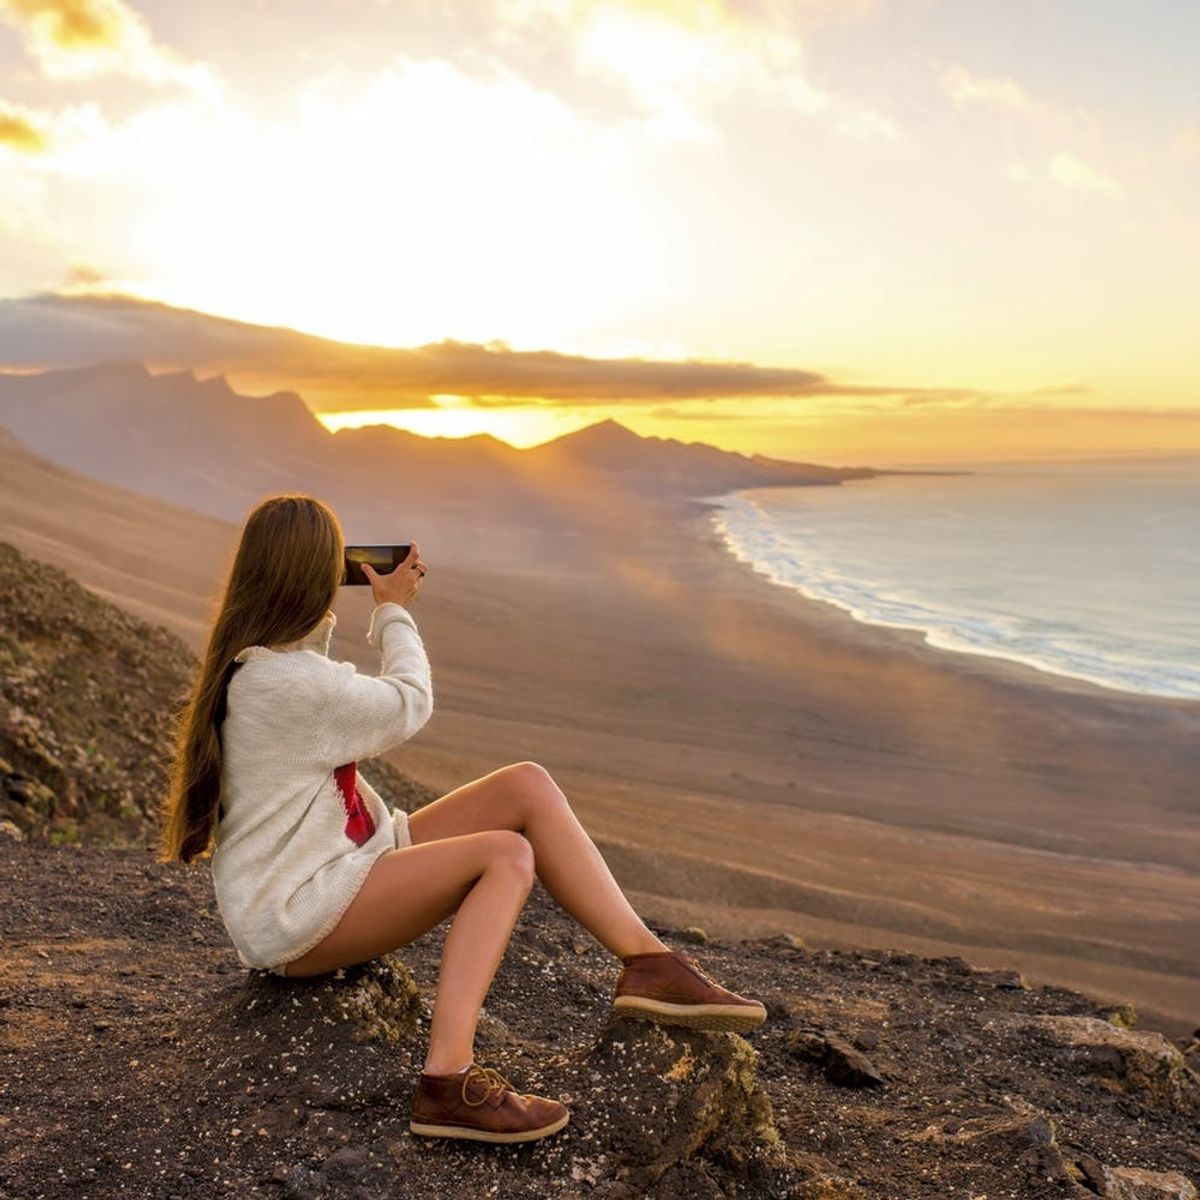 A Photog’s Tips for Taking Vacay Photos That Can Earn You Cash